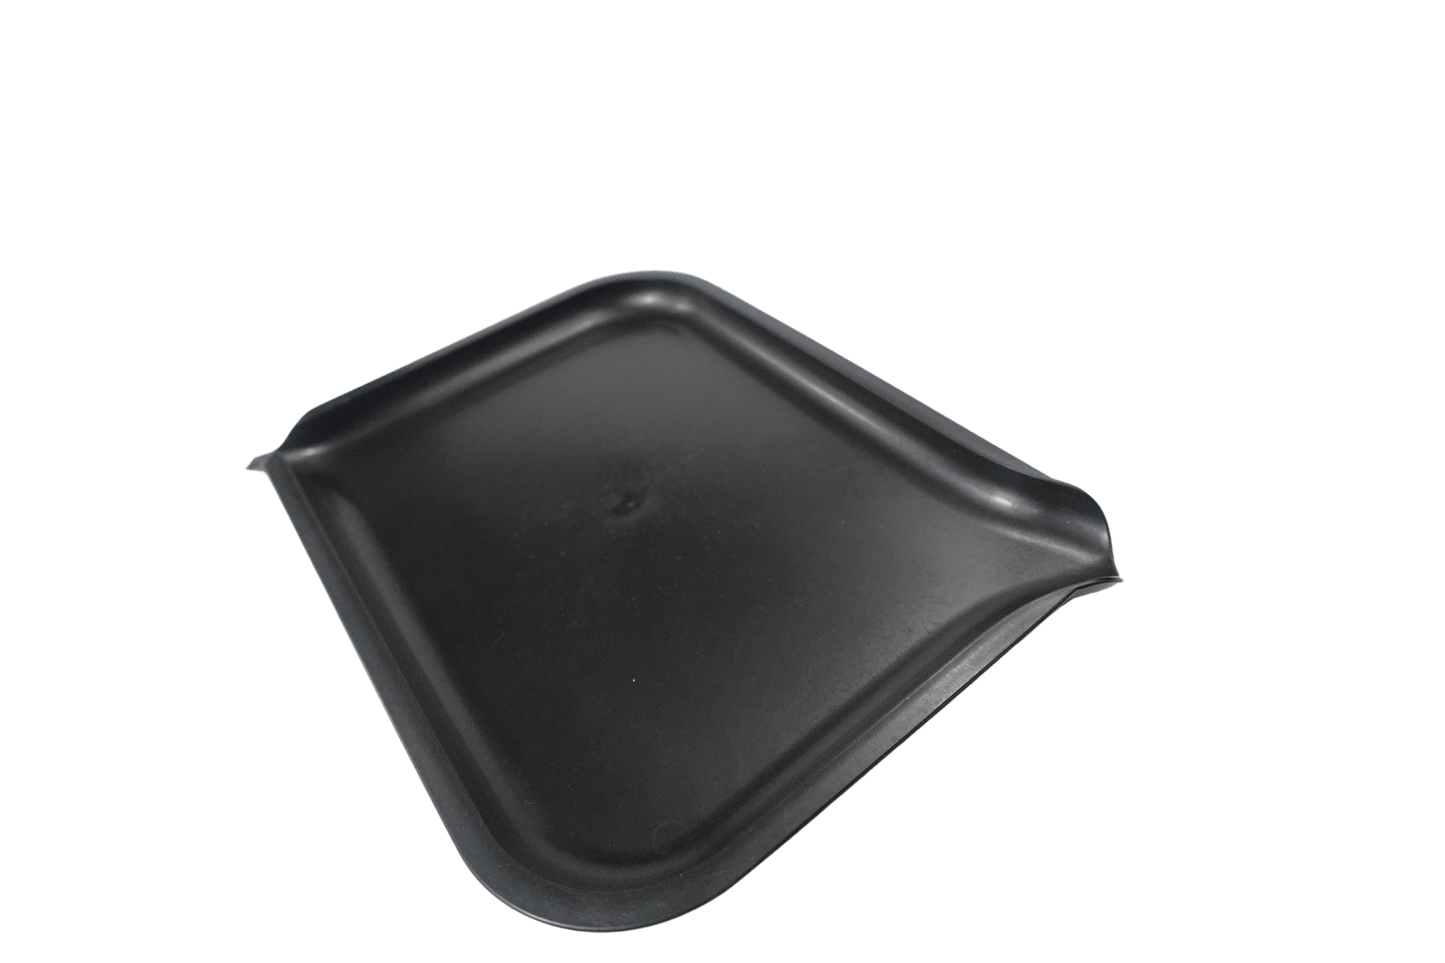 Cloud 8 Smoke Accessory Rolling Tray 8.5X6.5 Inches Small Fiber Biodegradable Rolling Tray with Pouring Funnel